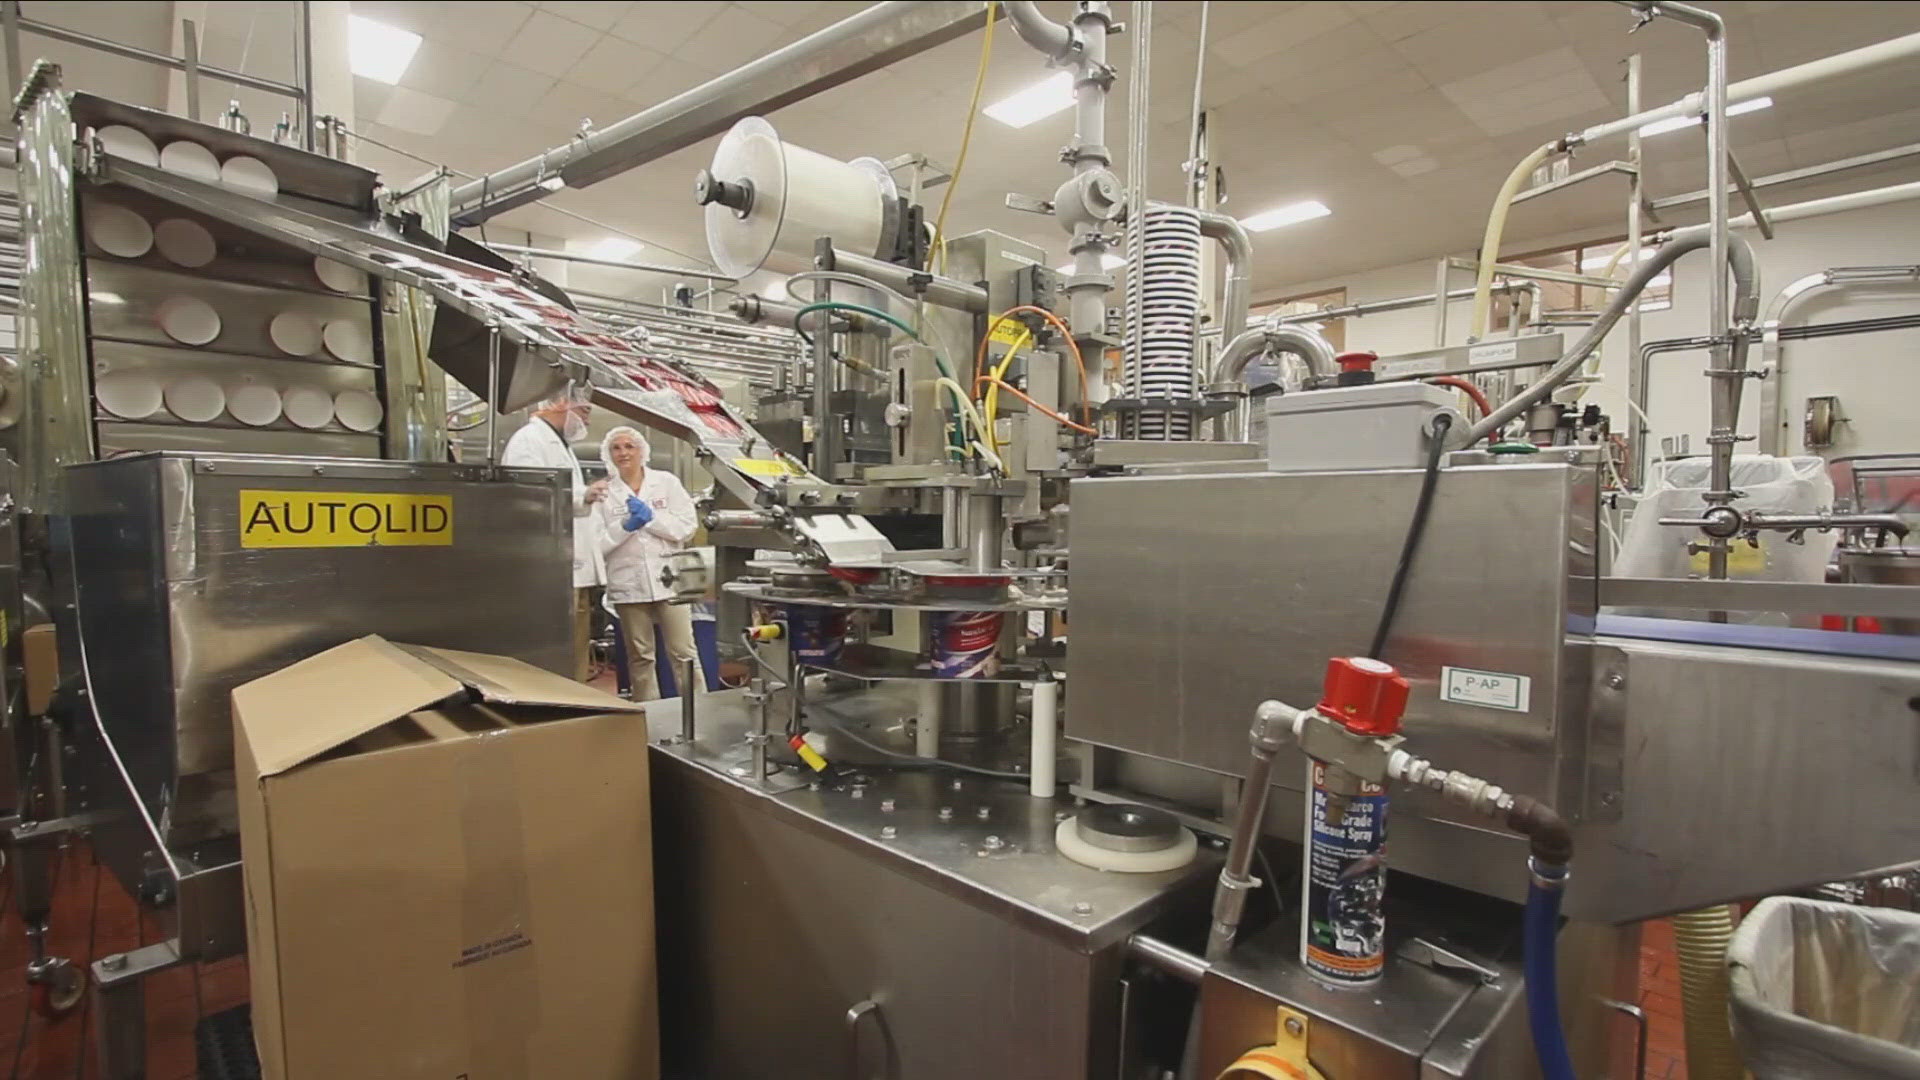 New manufacturing line has the ability to make sorbets, yogurt, non-dairy options, and more